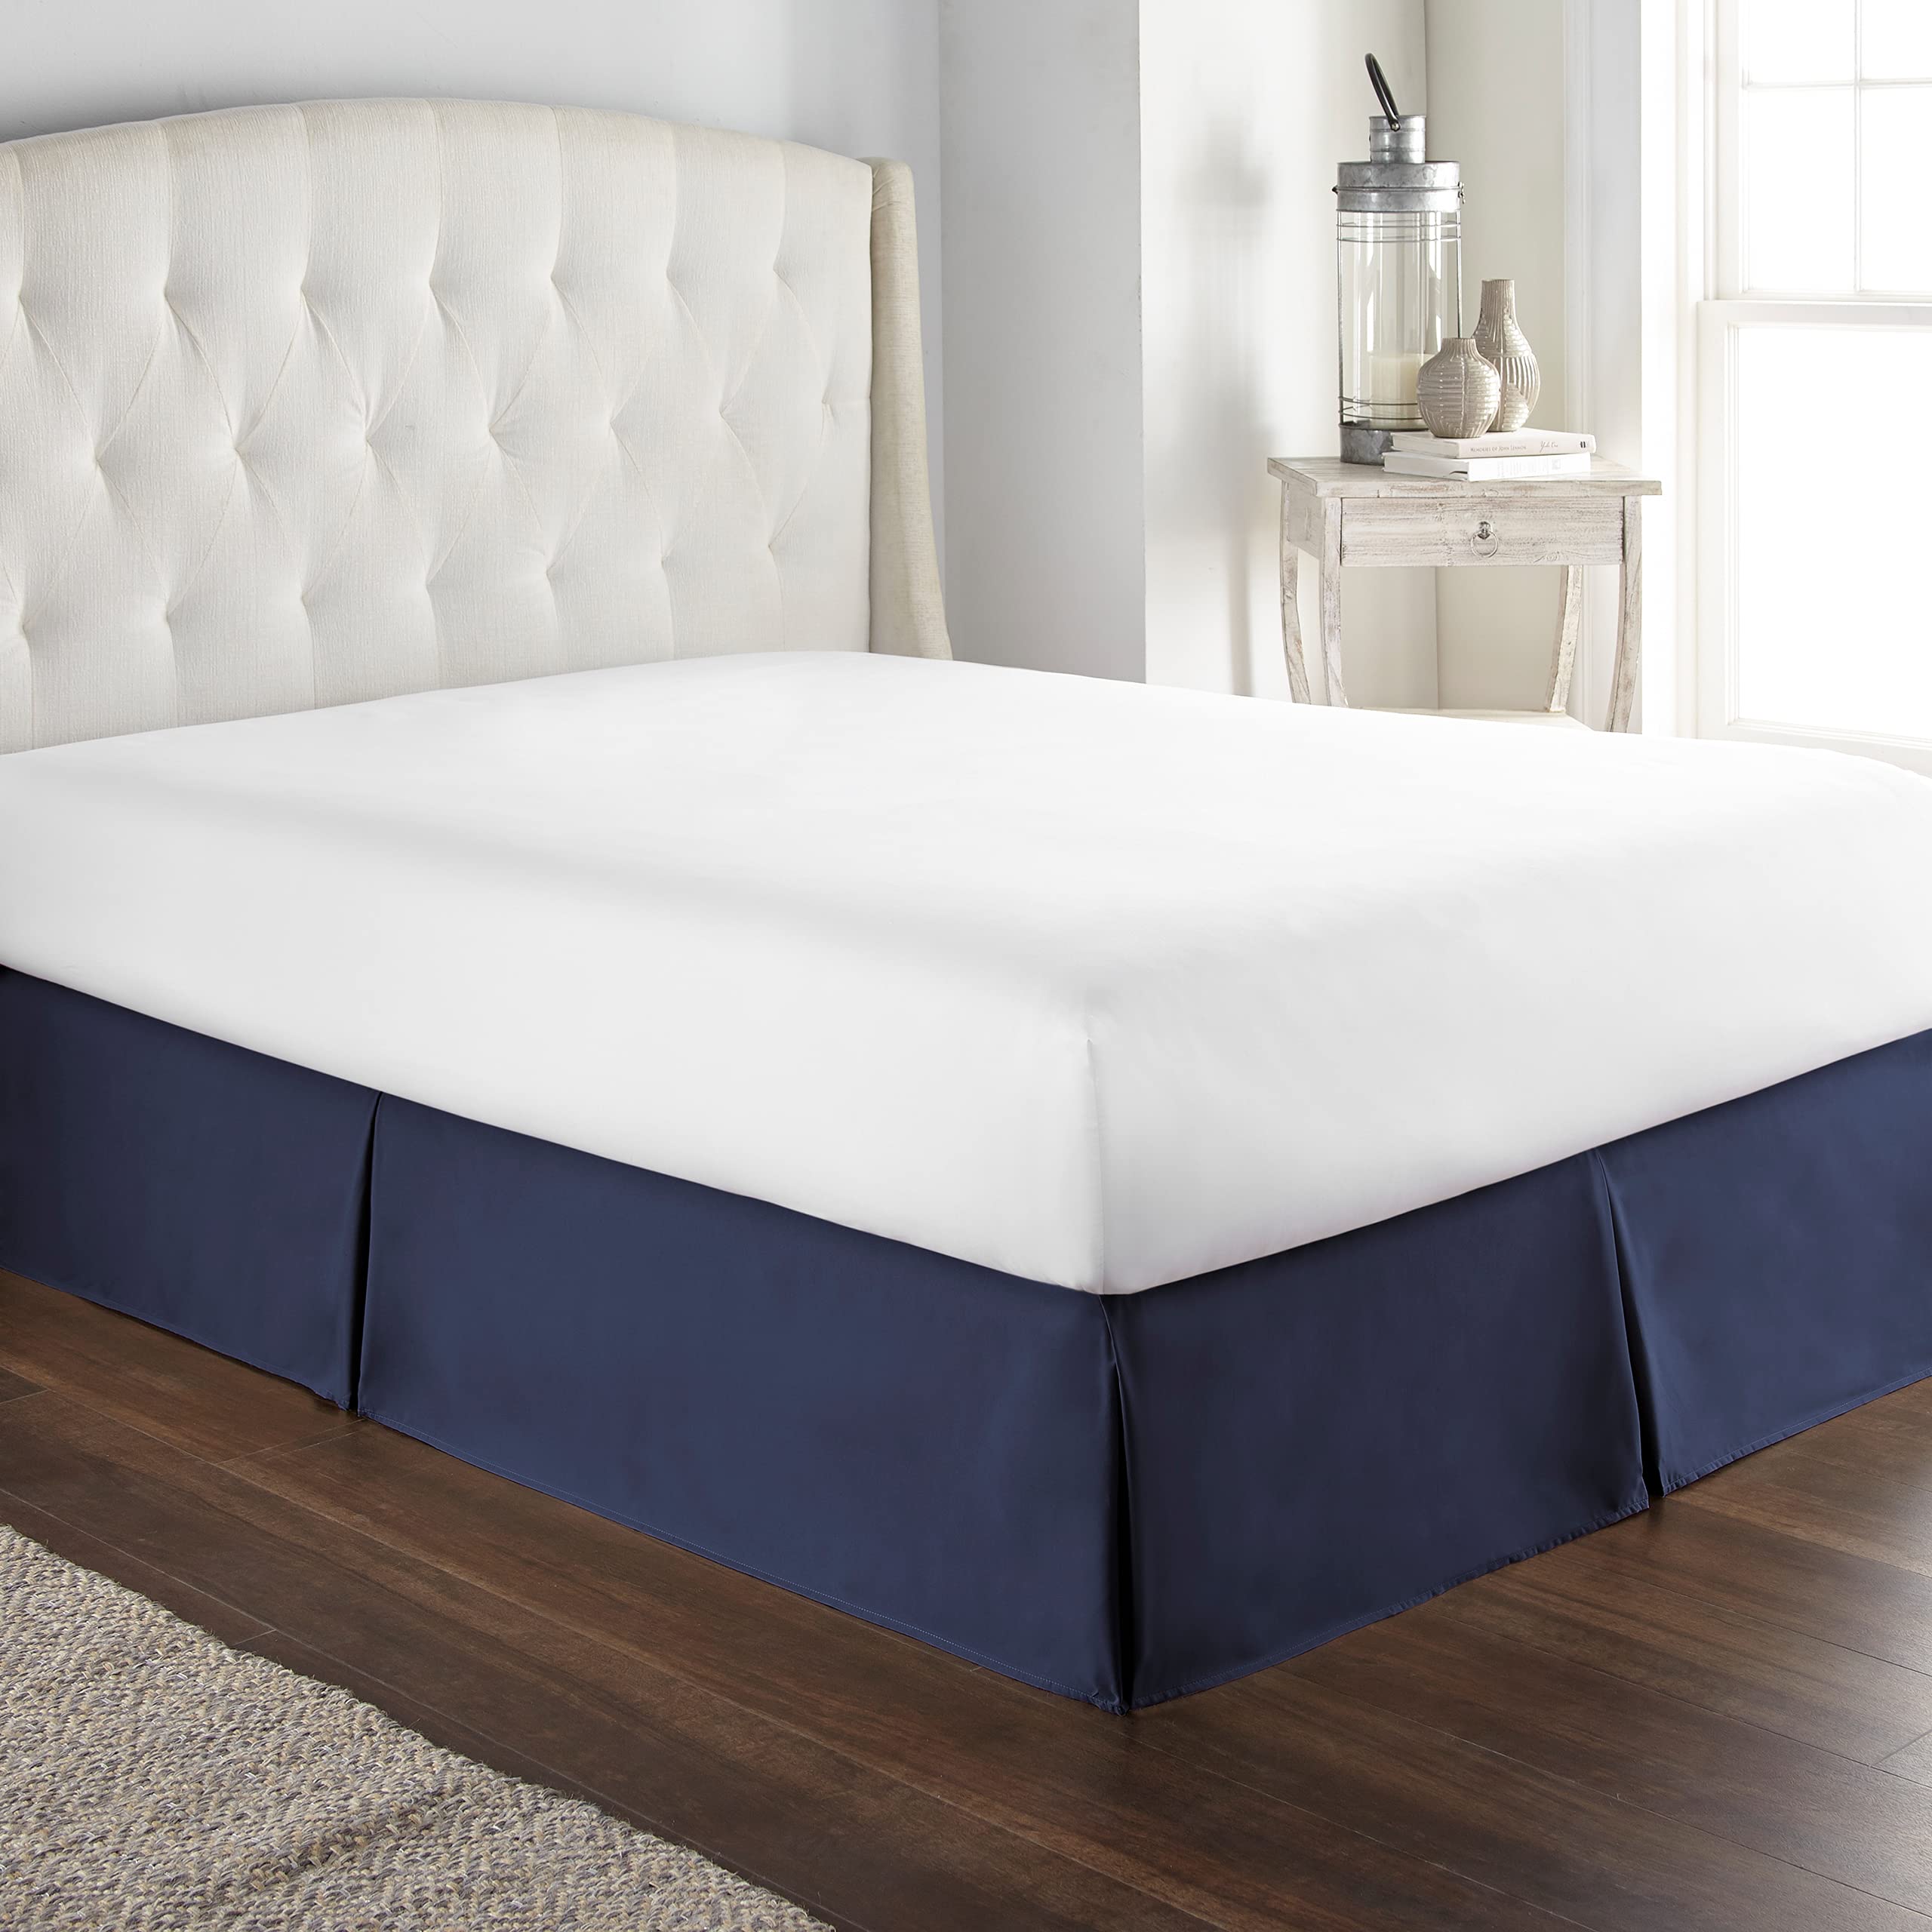 Book Cover HC Collection Navy King Bed Skirt - Dust Ruffle w/ 14 Inch Drop - Tailored, Wrinkle & Fade Resistant